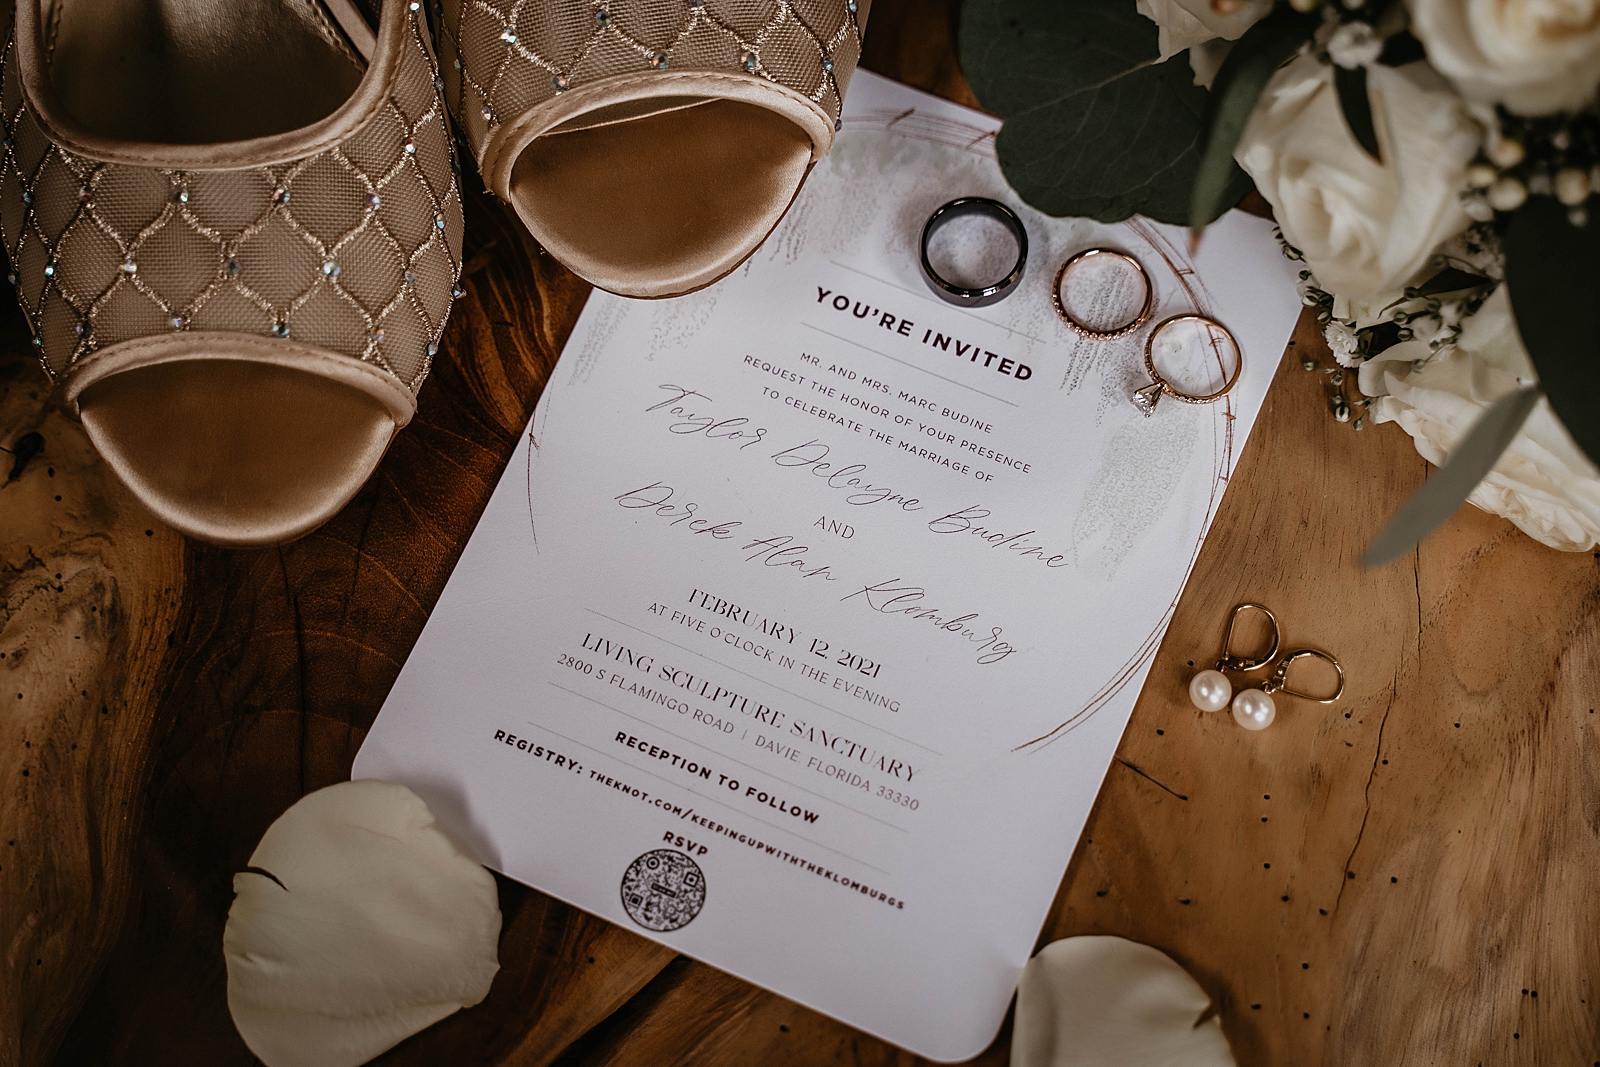 Wedding detail shot of shoes wedding bands engagement ring invitation and pearl earrings on wood backdrop Living Sculptures Sanctuary Wedding Photography captured by South Florida Wedding Photographer Krystal Capone Photography 